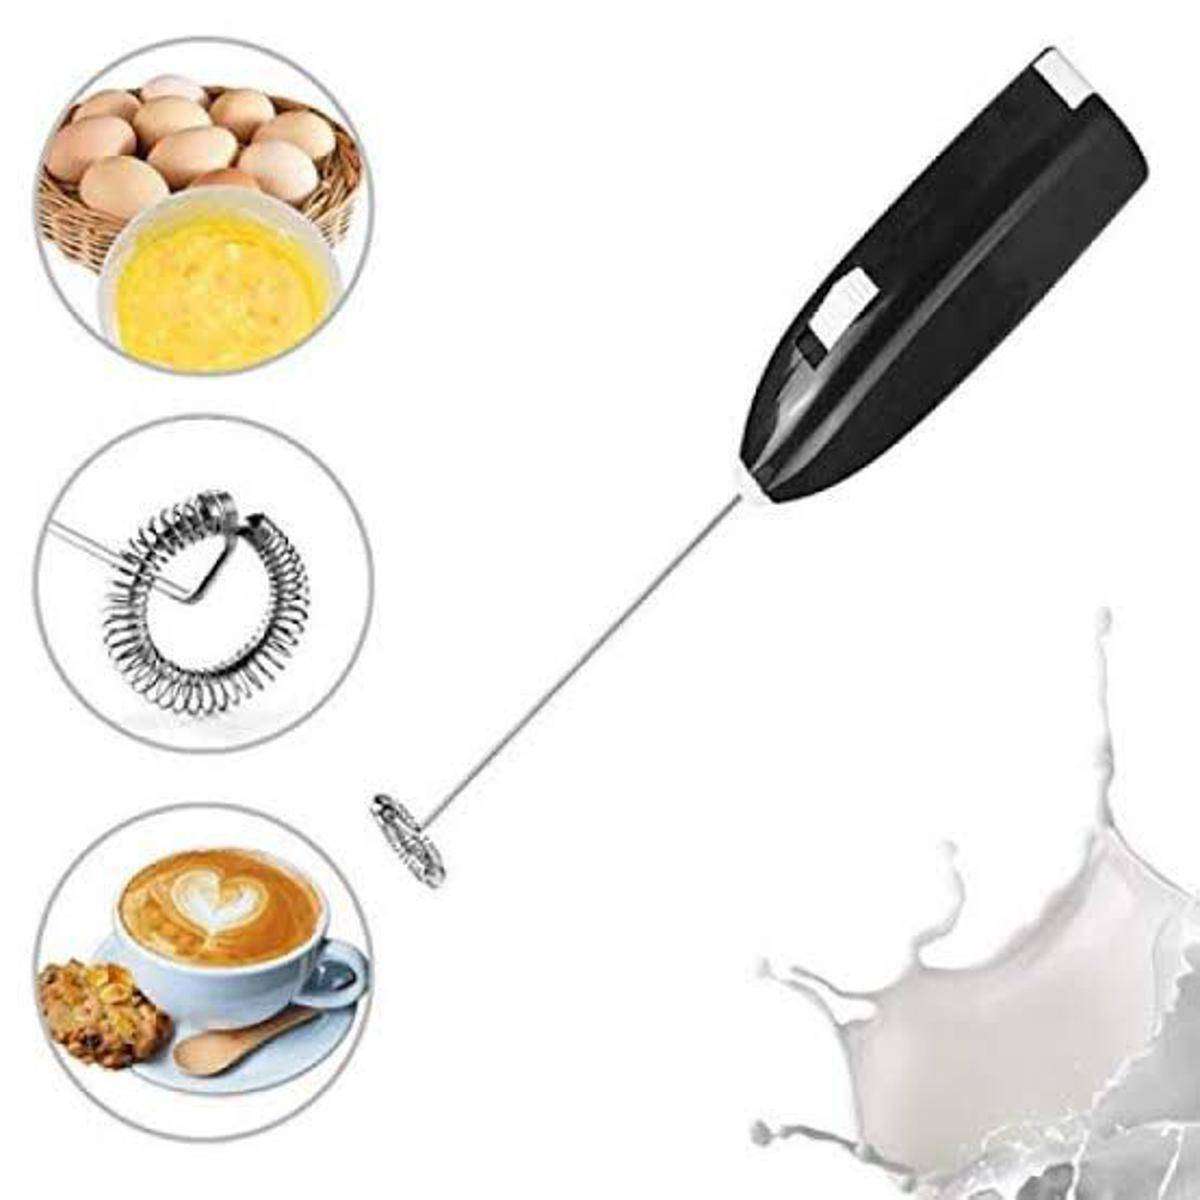 Handheld Coffee Beater Egg Mixer and Whisker Milk Frother - The